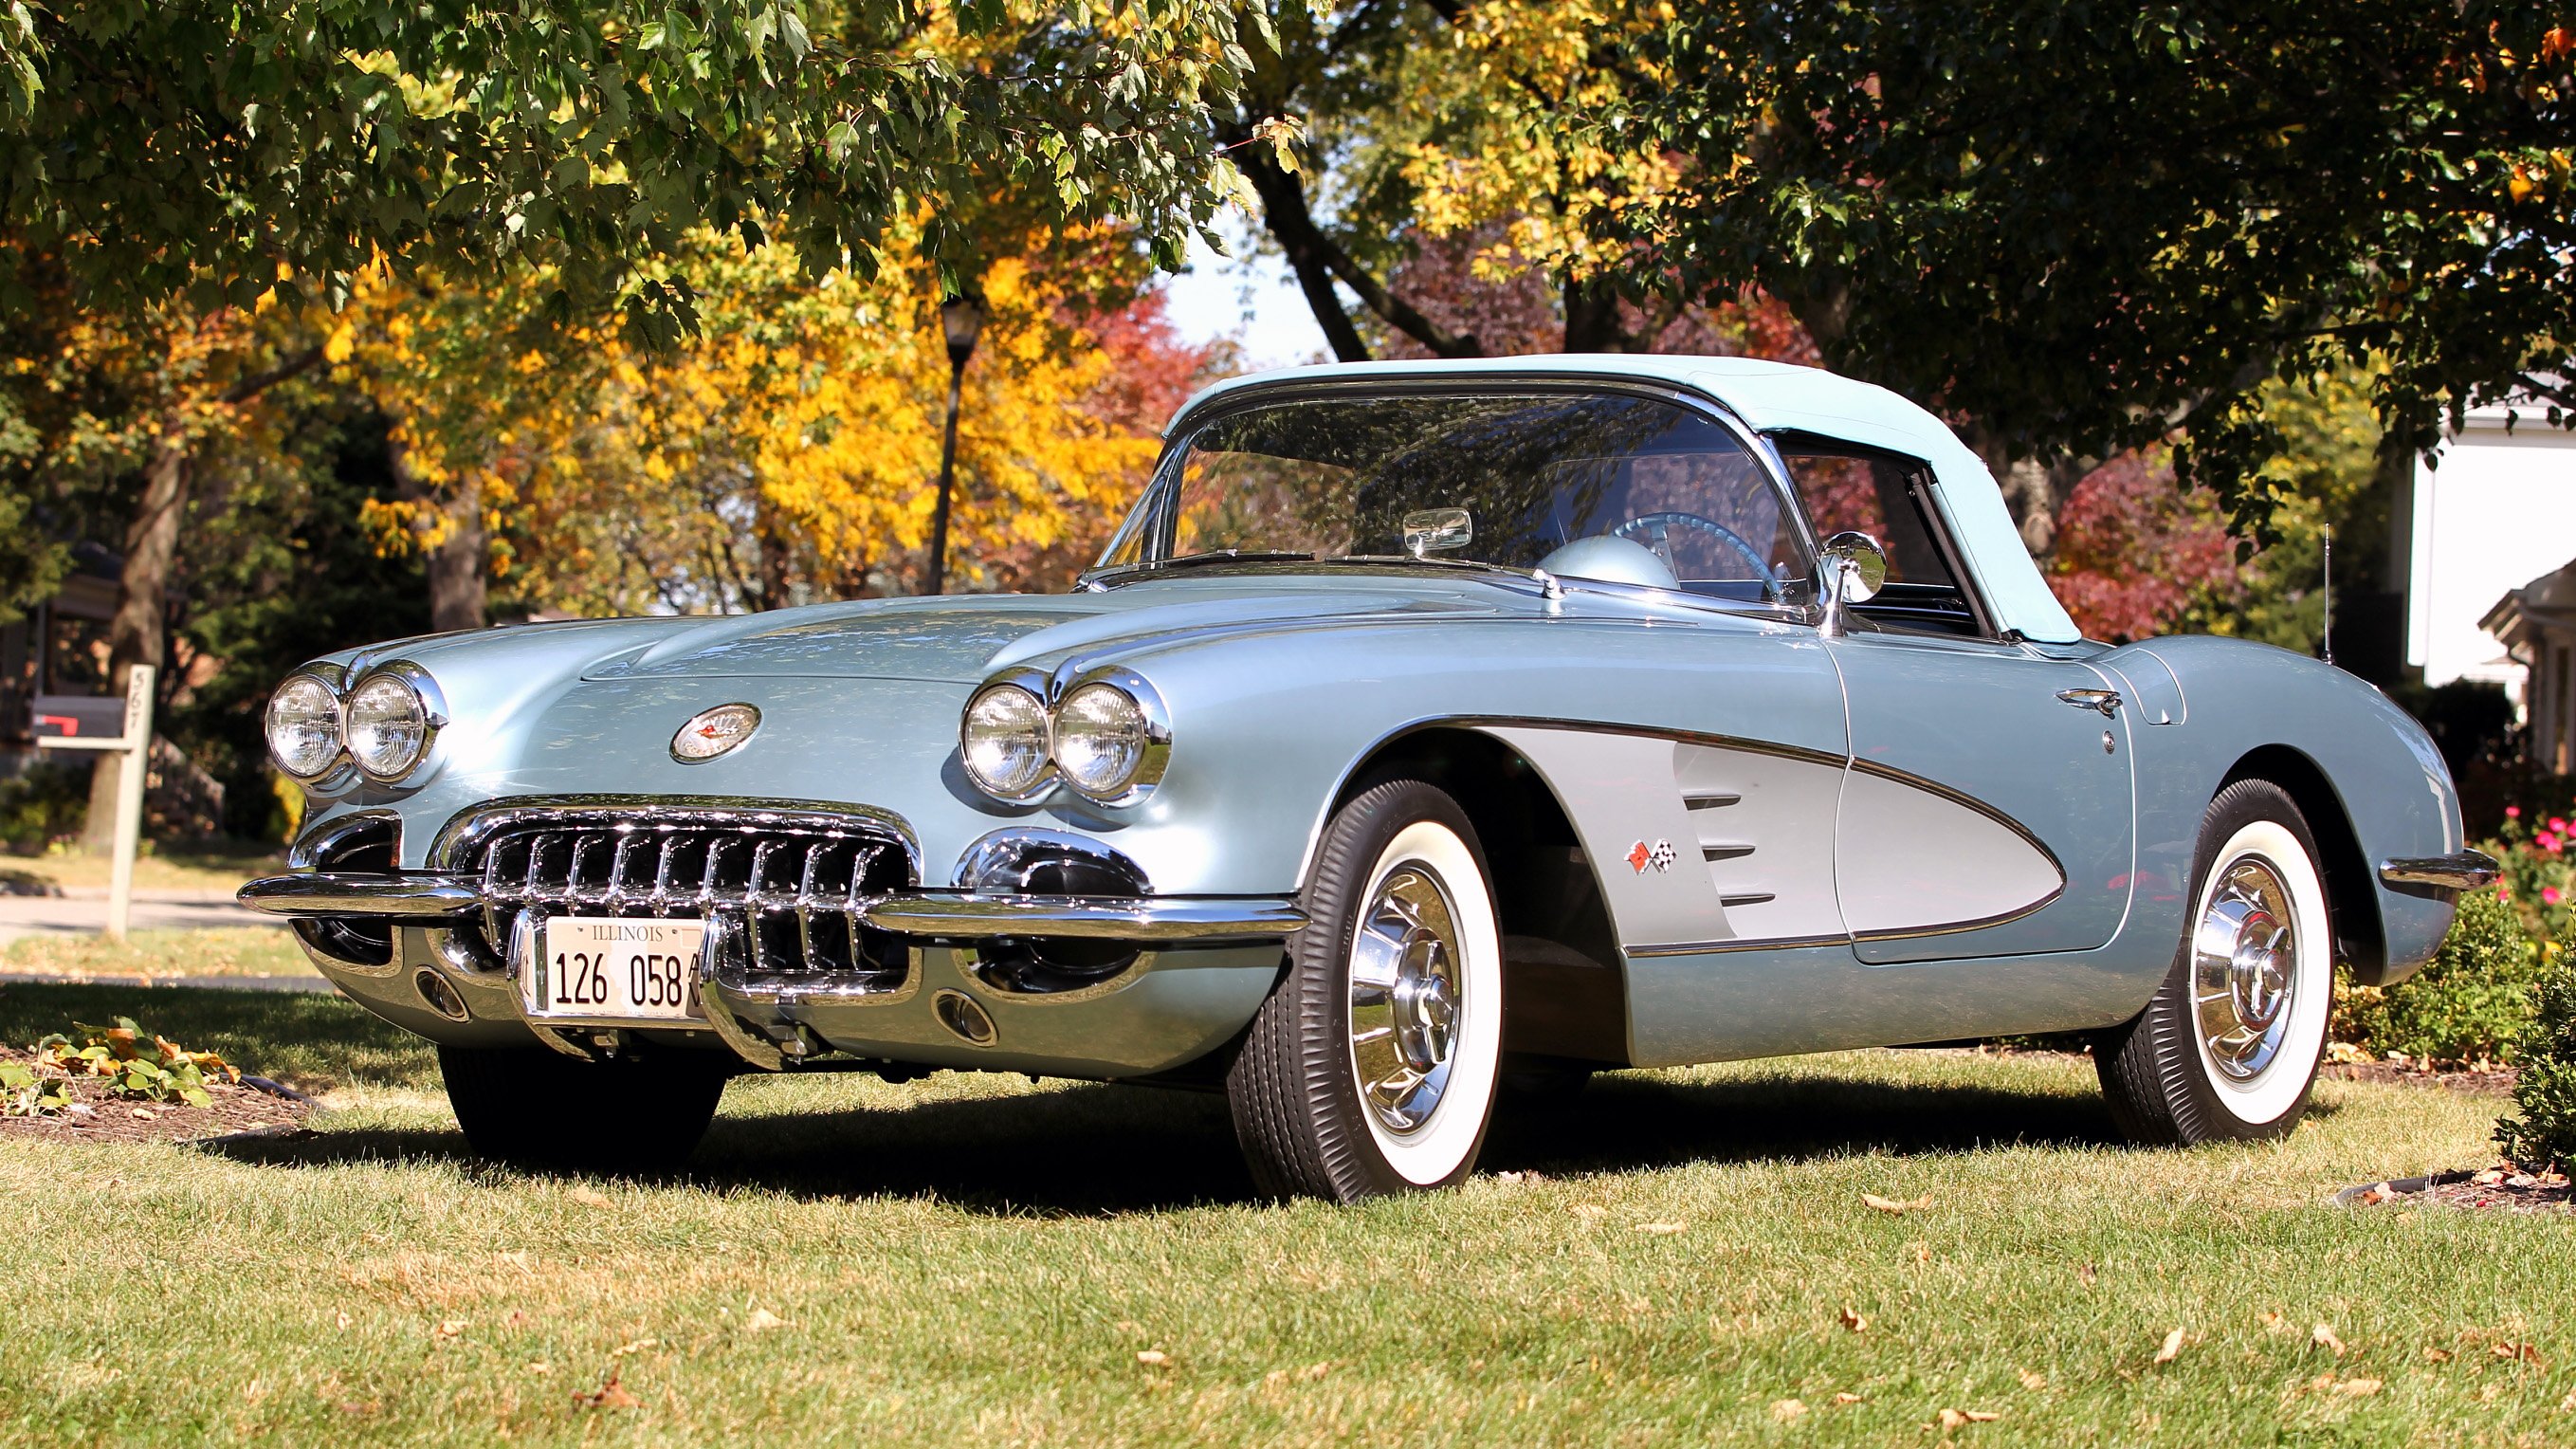 1958, Chevrolet, Corvette, Convertible, Muscle, Classic, Old, Silver, Usa, 2117x1528 0181 Wallpaper